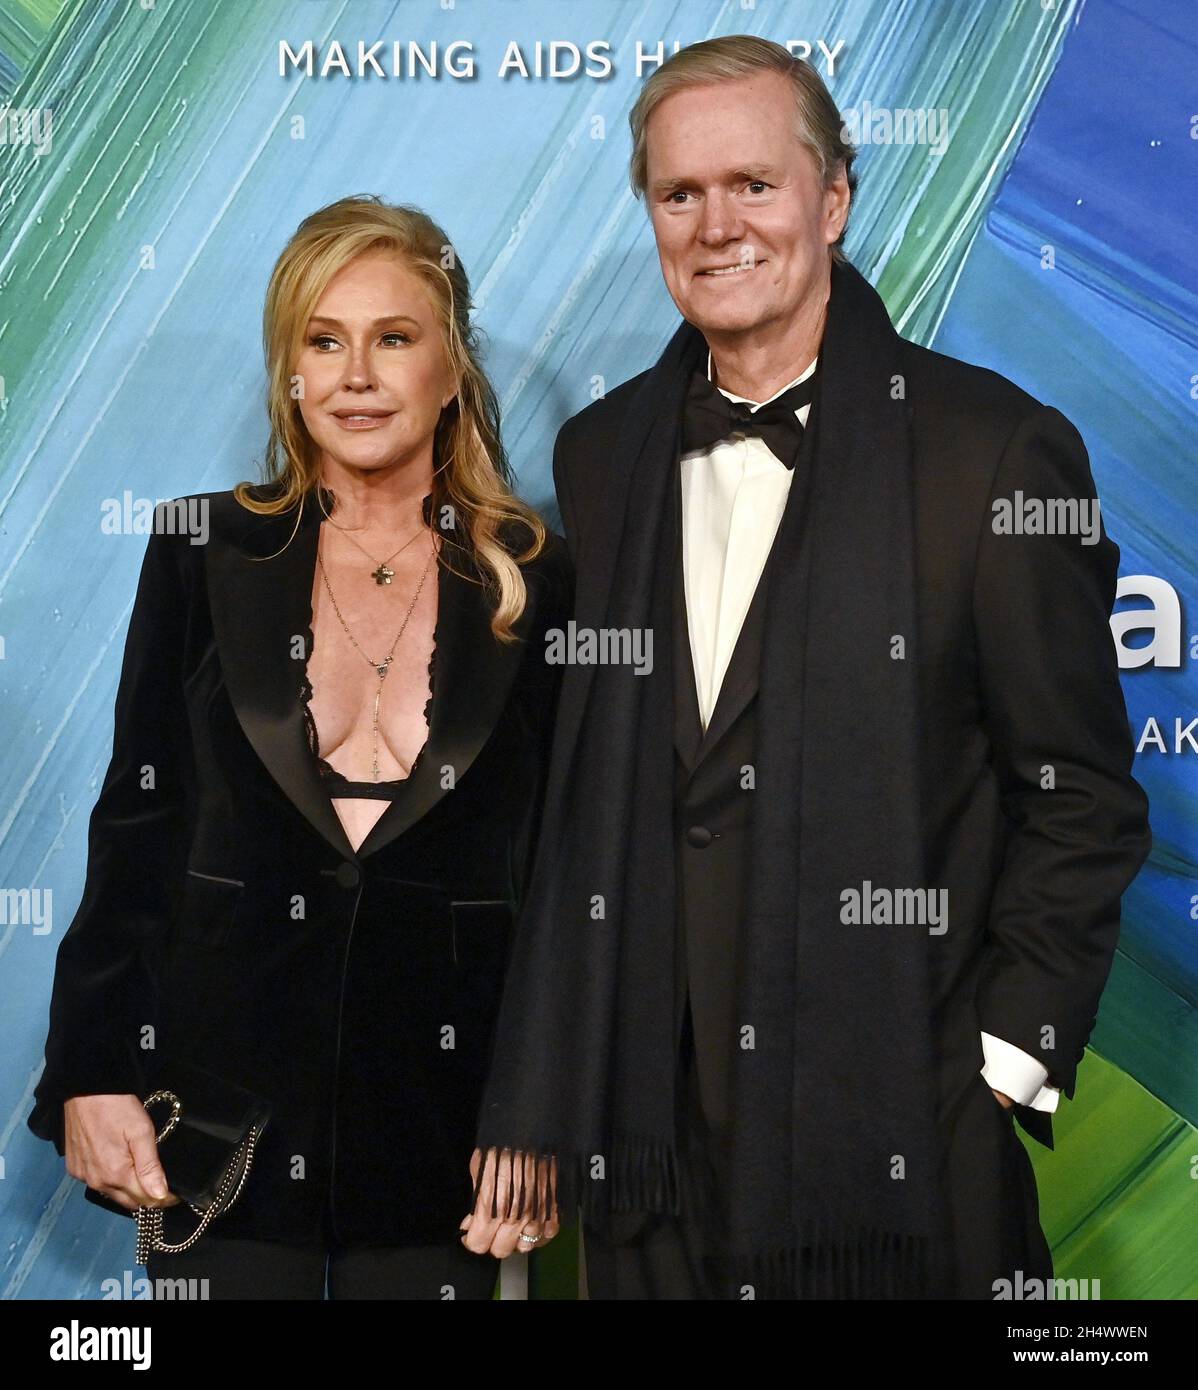 West Hollywood, United States. 05th Nov, 2021. Kathy Hilton and Rick Hilton attend the amfAR Gala Los Angeles 2021 honoring TikTok and Jeremy Scott at the Pacific Design Center in West Hollywood, California on Thursday, October 4, 2021. Photo by Jim Ruymen/UPI Credit: UPI/Alamy Live News Stock Photo